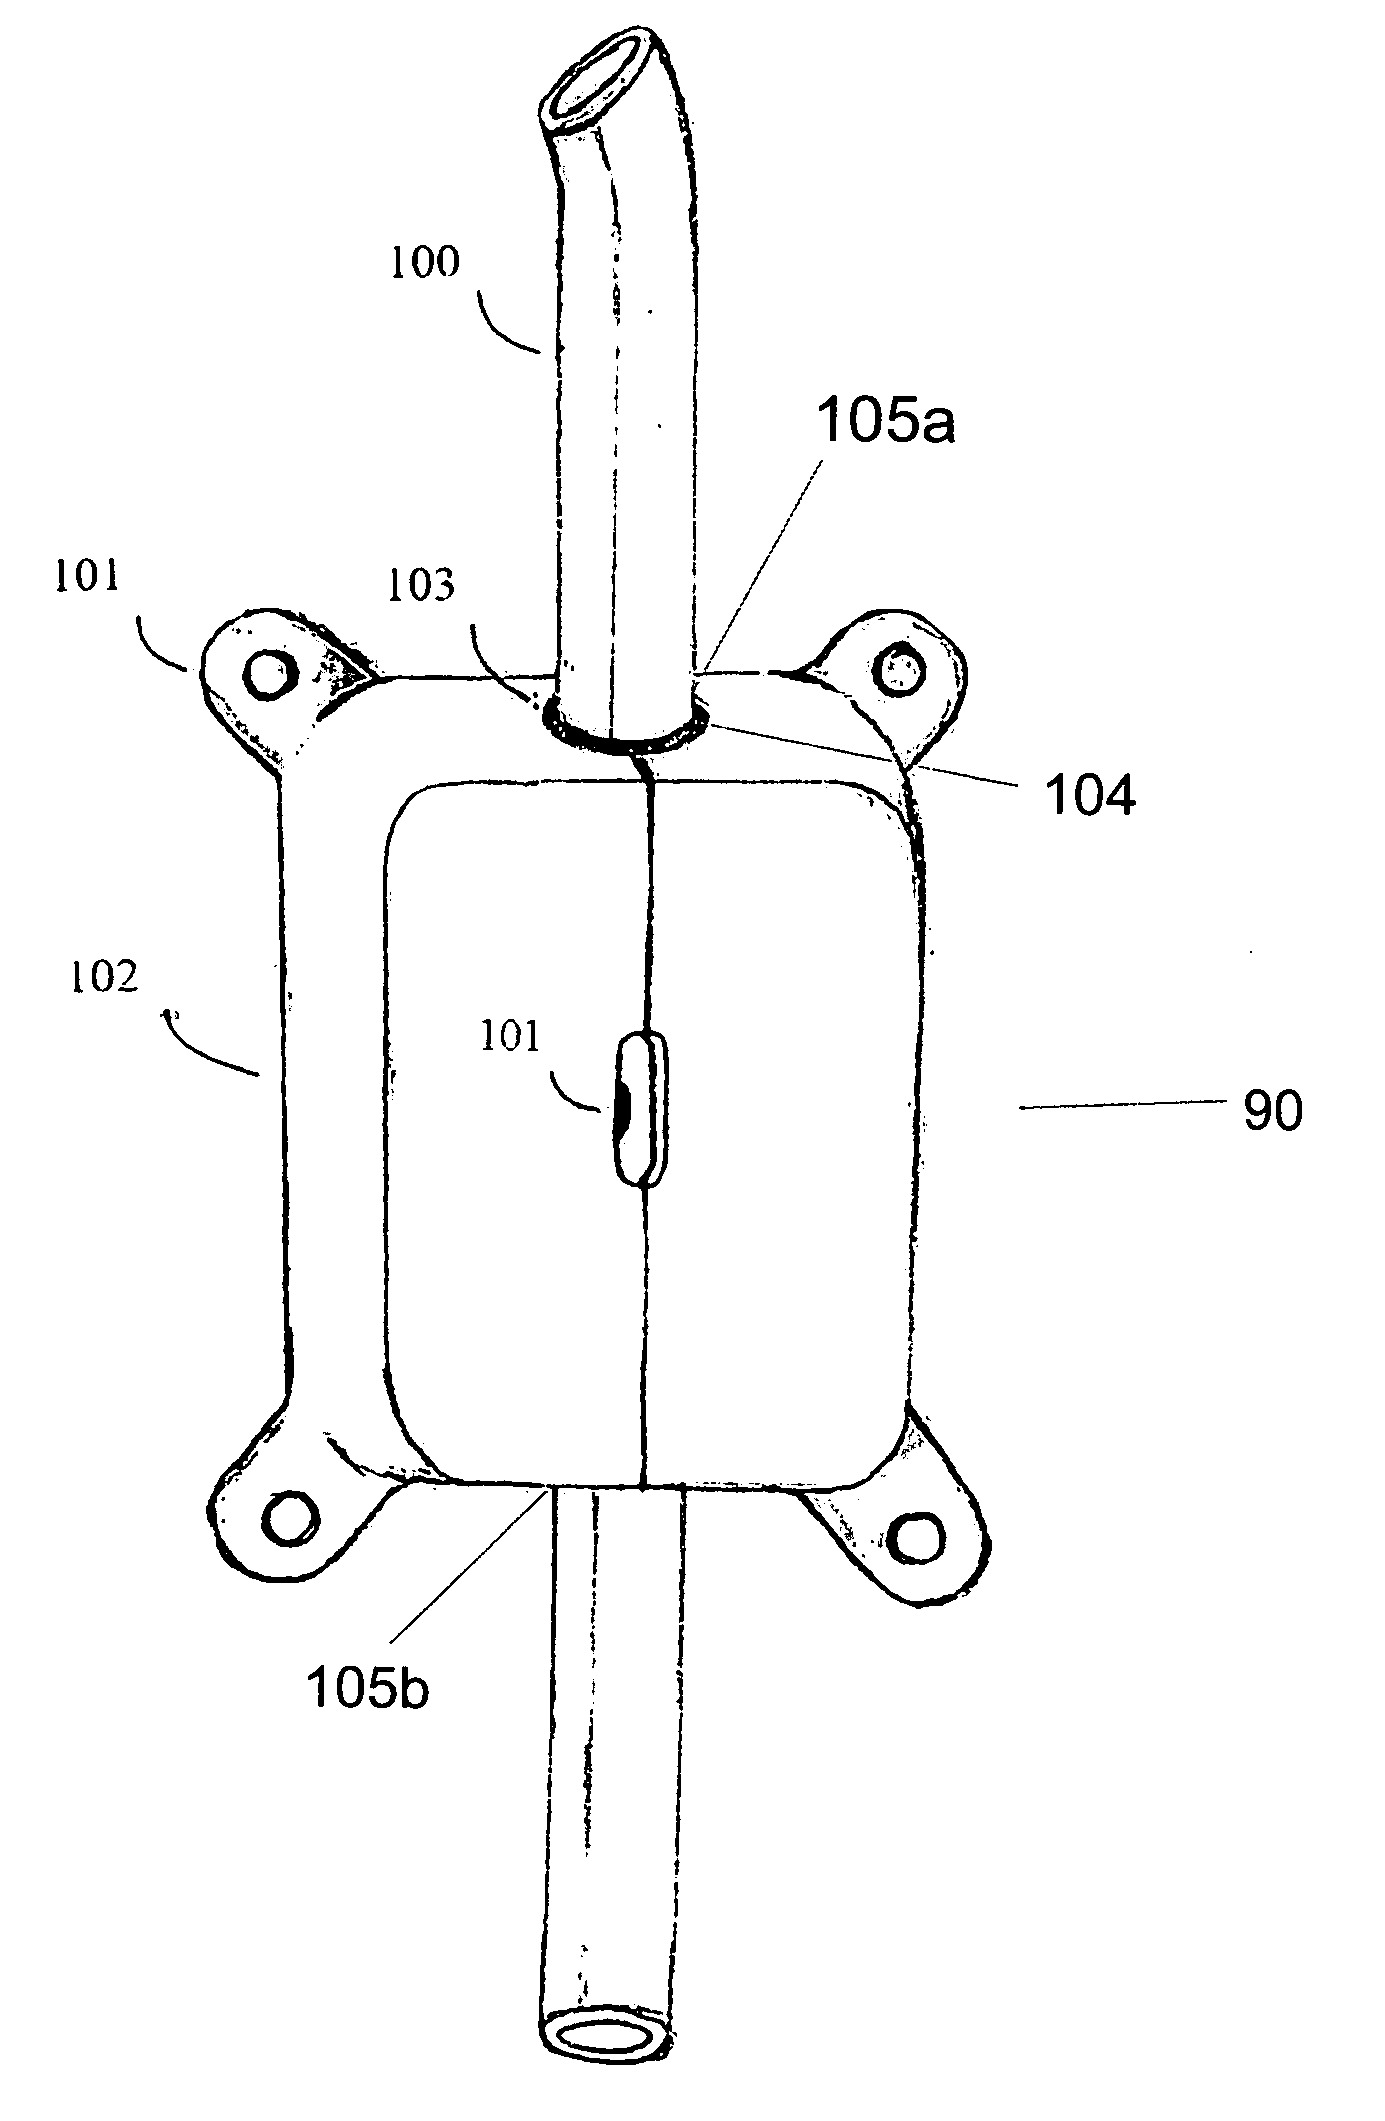 Implantable anti-clogging device for maintenance of cerebrospinal fluid shunt patency